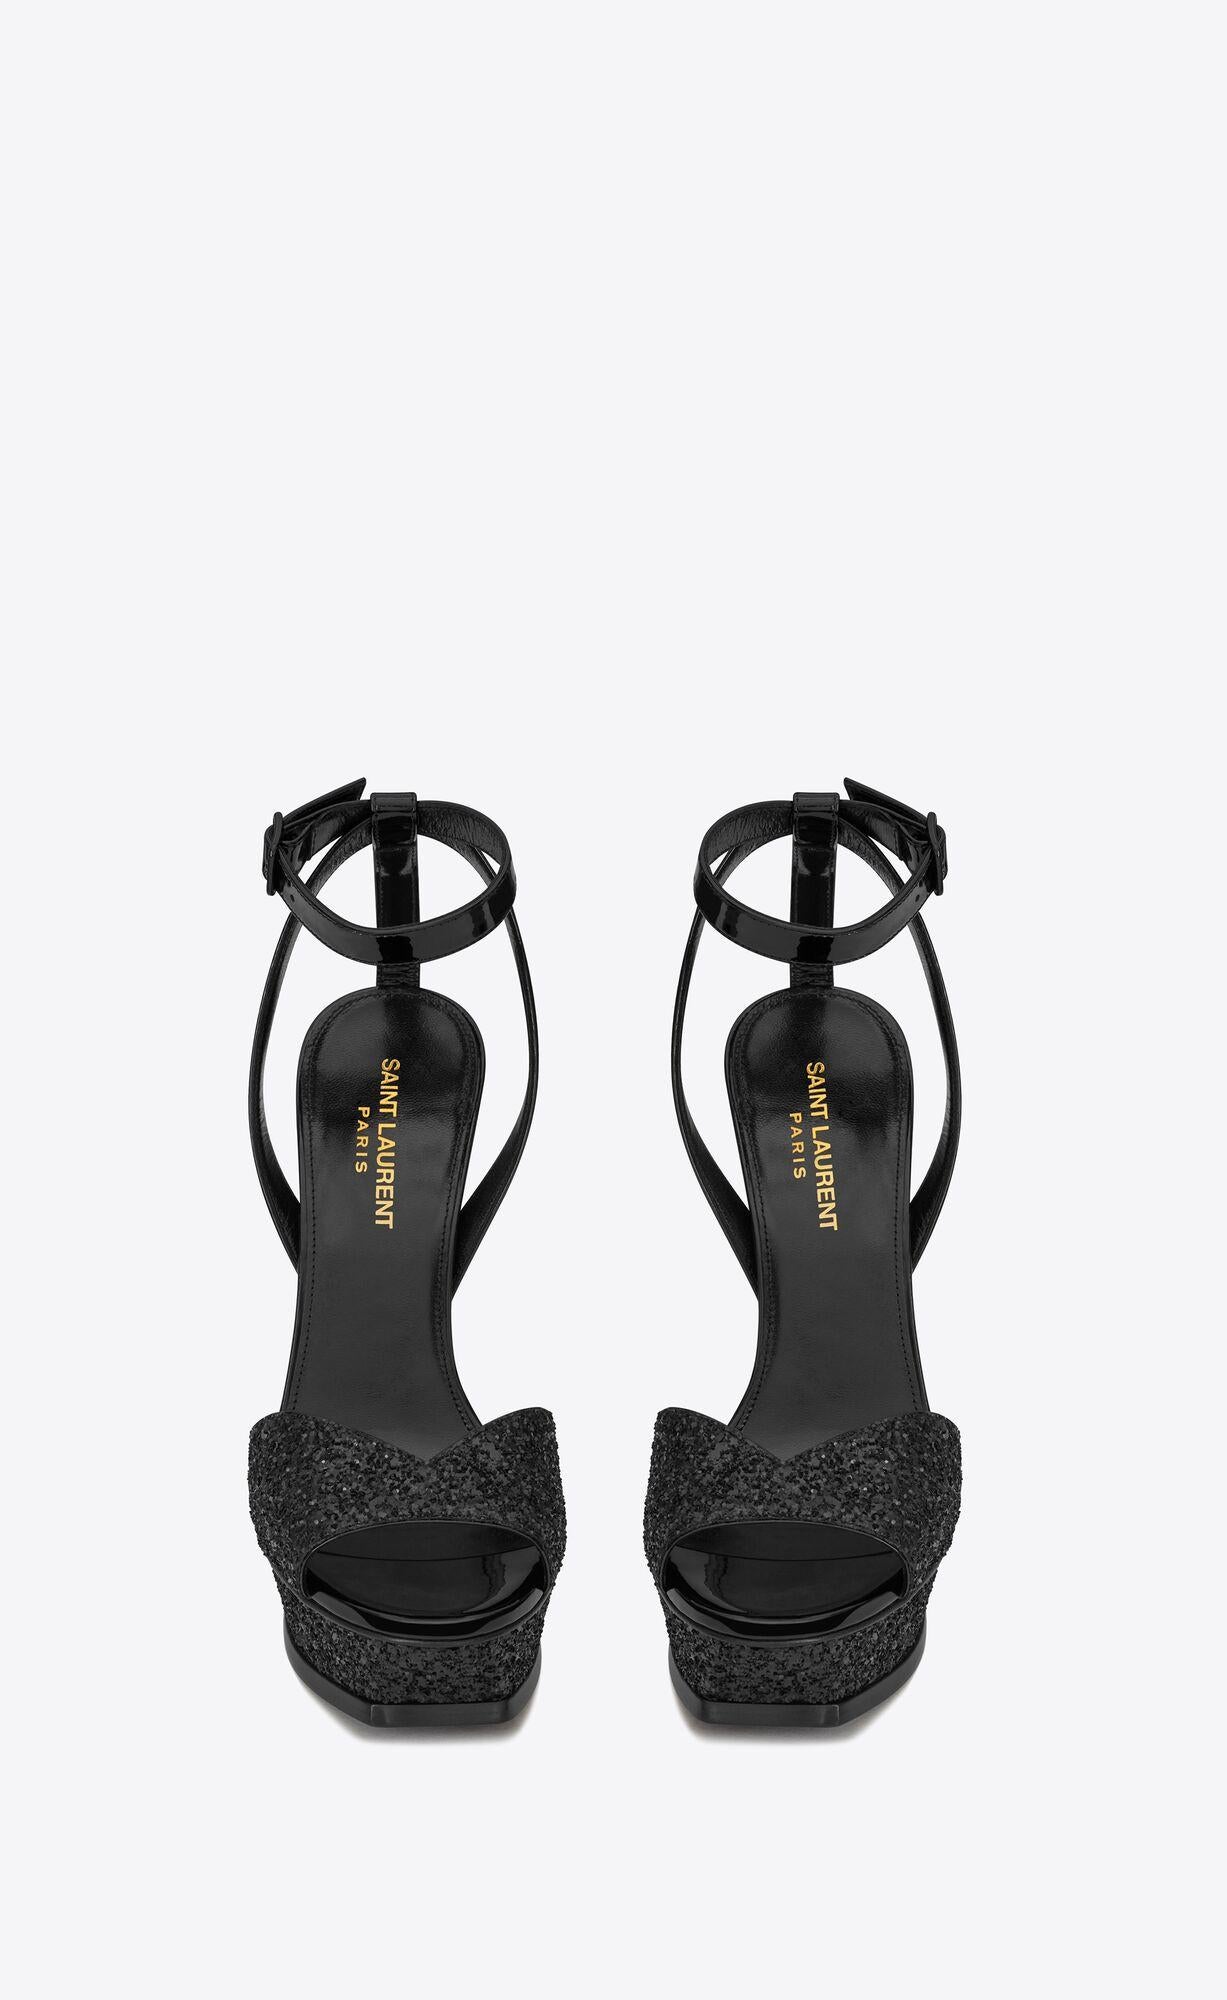 Saint Laurent Black Glitter and Patent Leather Tribute Lips Sandal 

These Saint Laurent Tribute Lips sandals feature glitter, a v-cut vamp, beveled platform, a stiletto heel, open toe, leather sole, and adjustable ankle strap. Brand new.

Size: 41